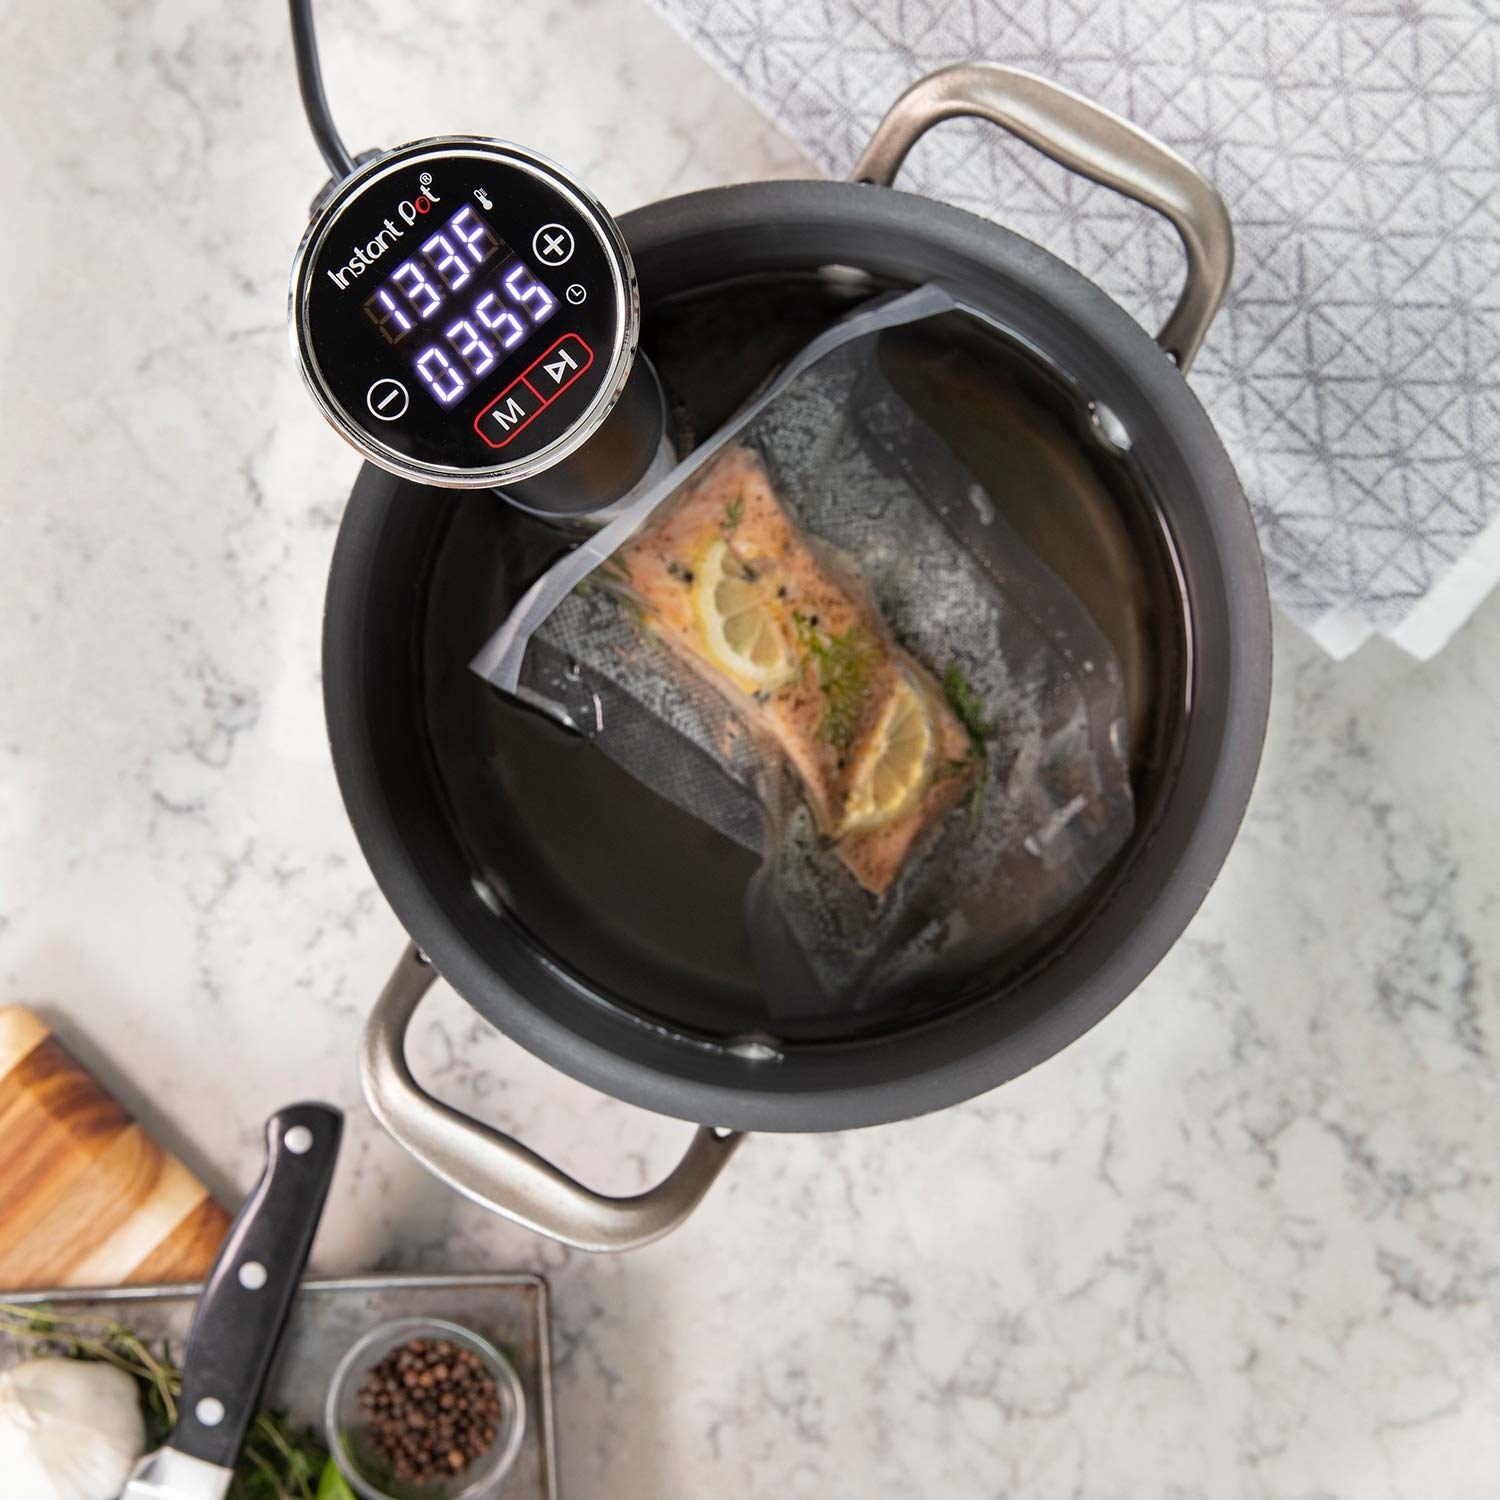 The sous vide cooker, featuring a digital display